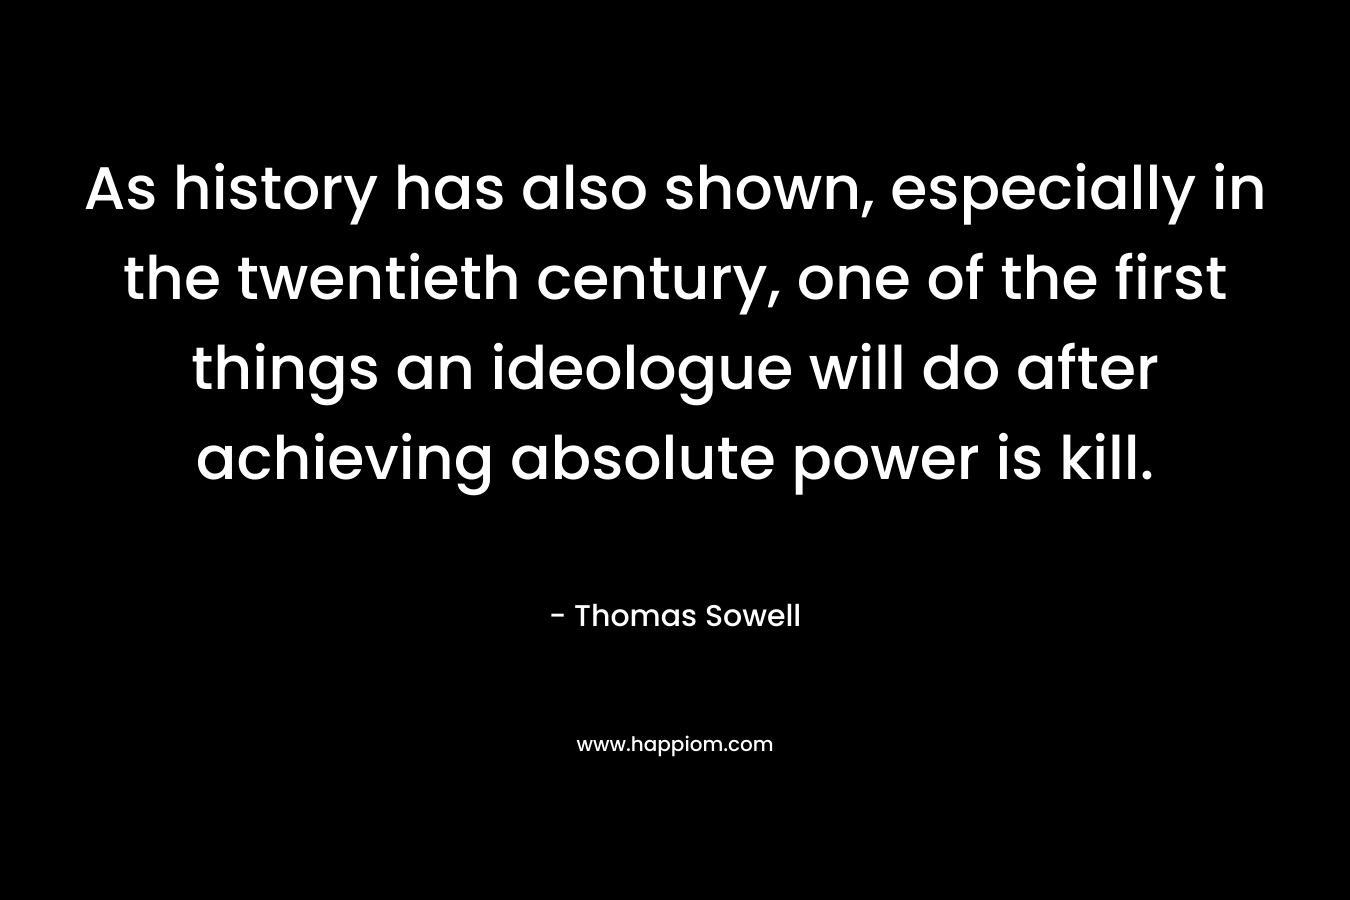 As history has also shown, especially in the twentieth century, one of the first things an ideologue will do after achieving absolute power is kill.